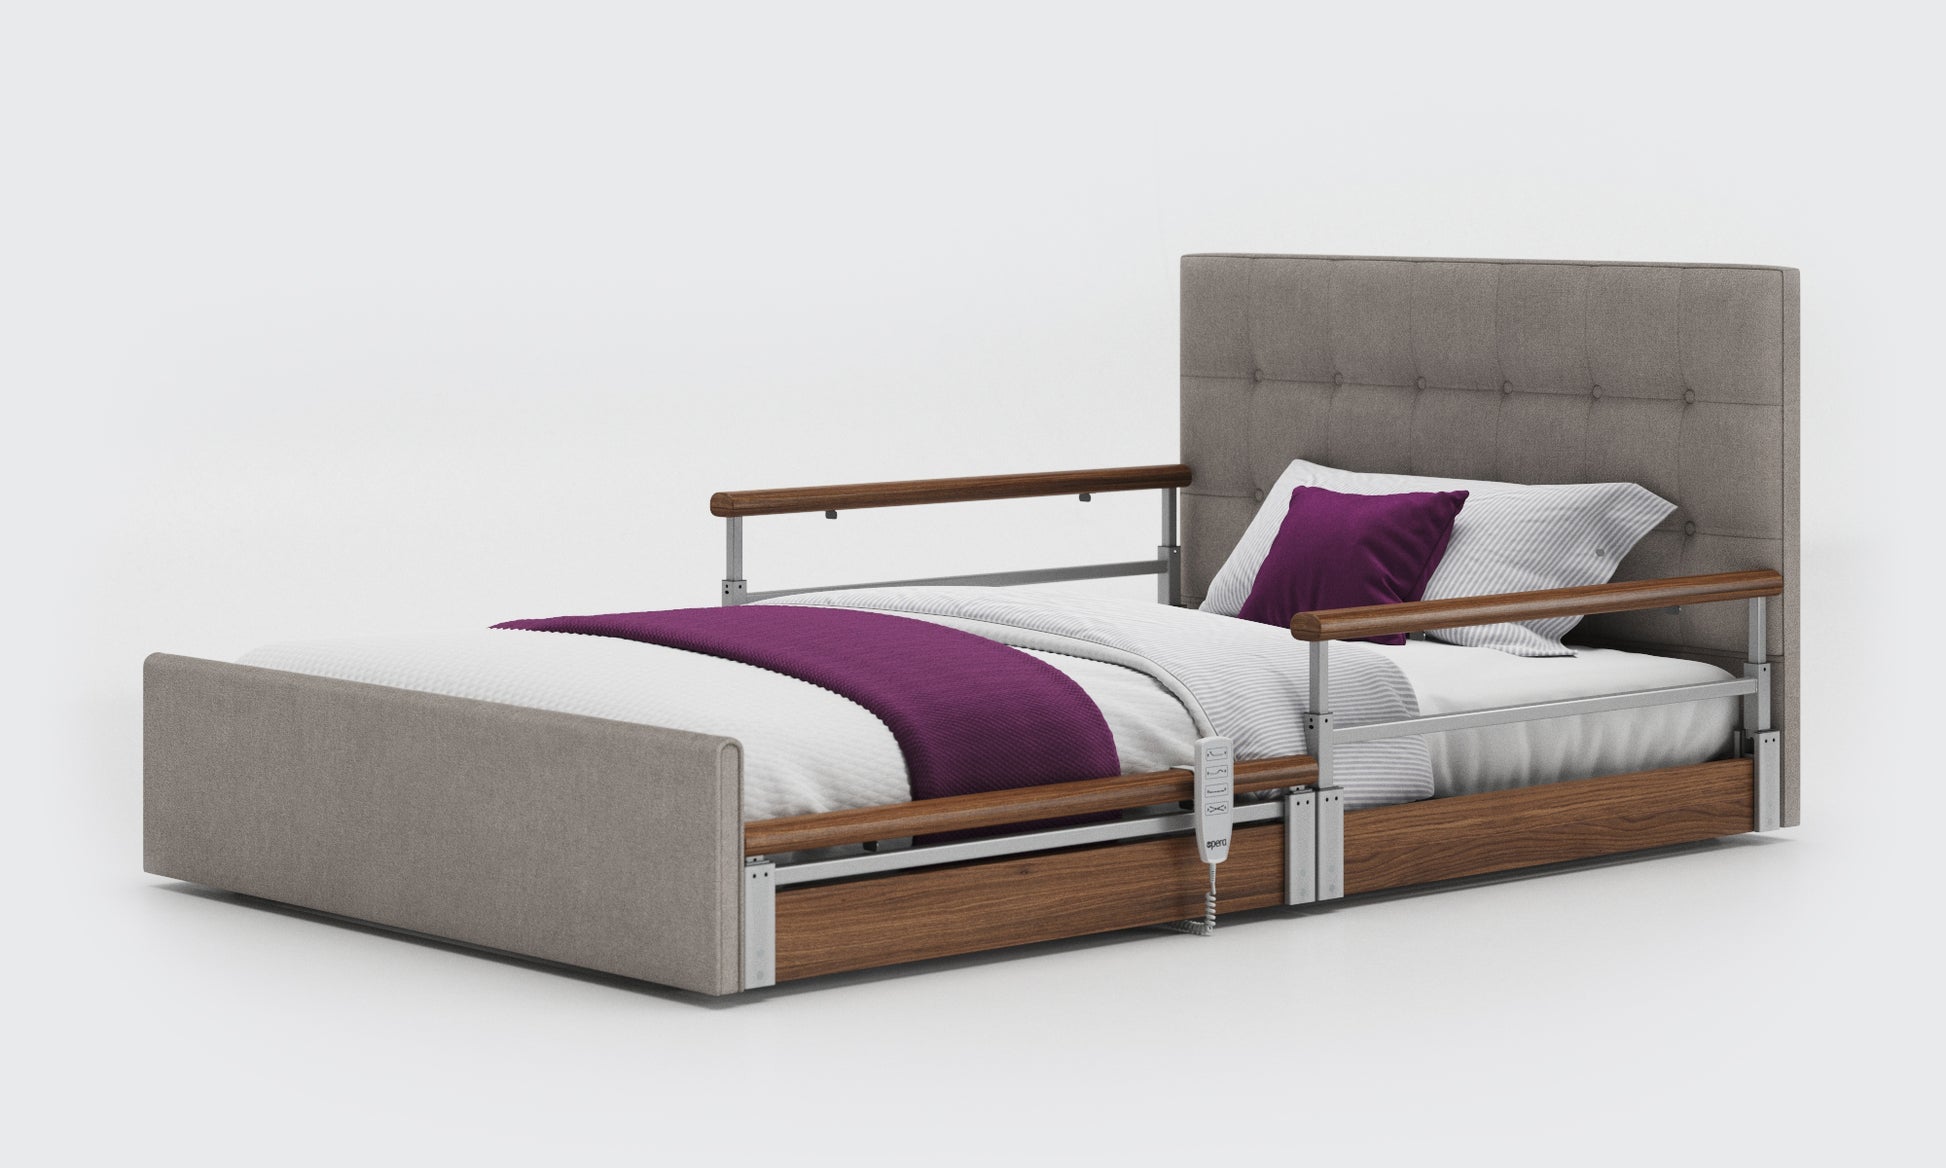 solo comfort plus bed in 4ft with walnut split rails and an emerald headboard in zinc fabric